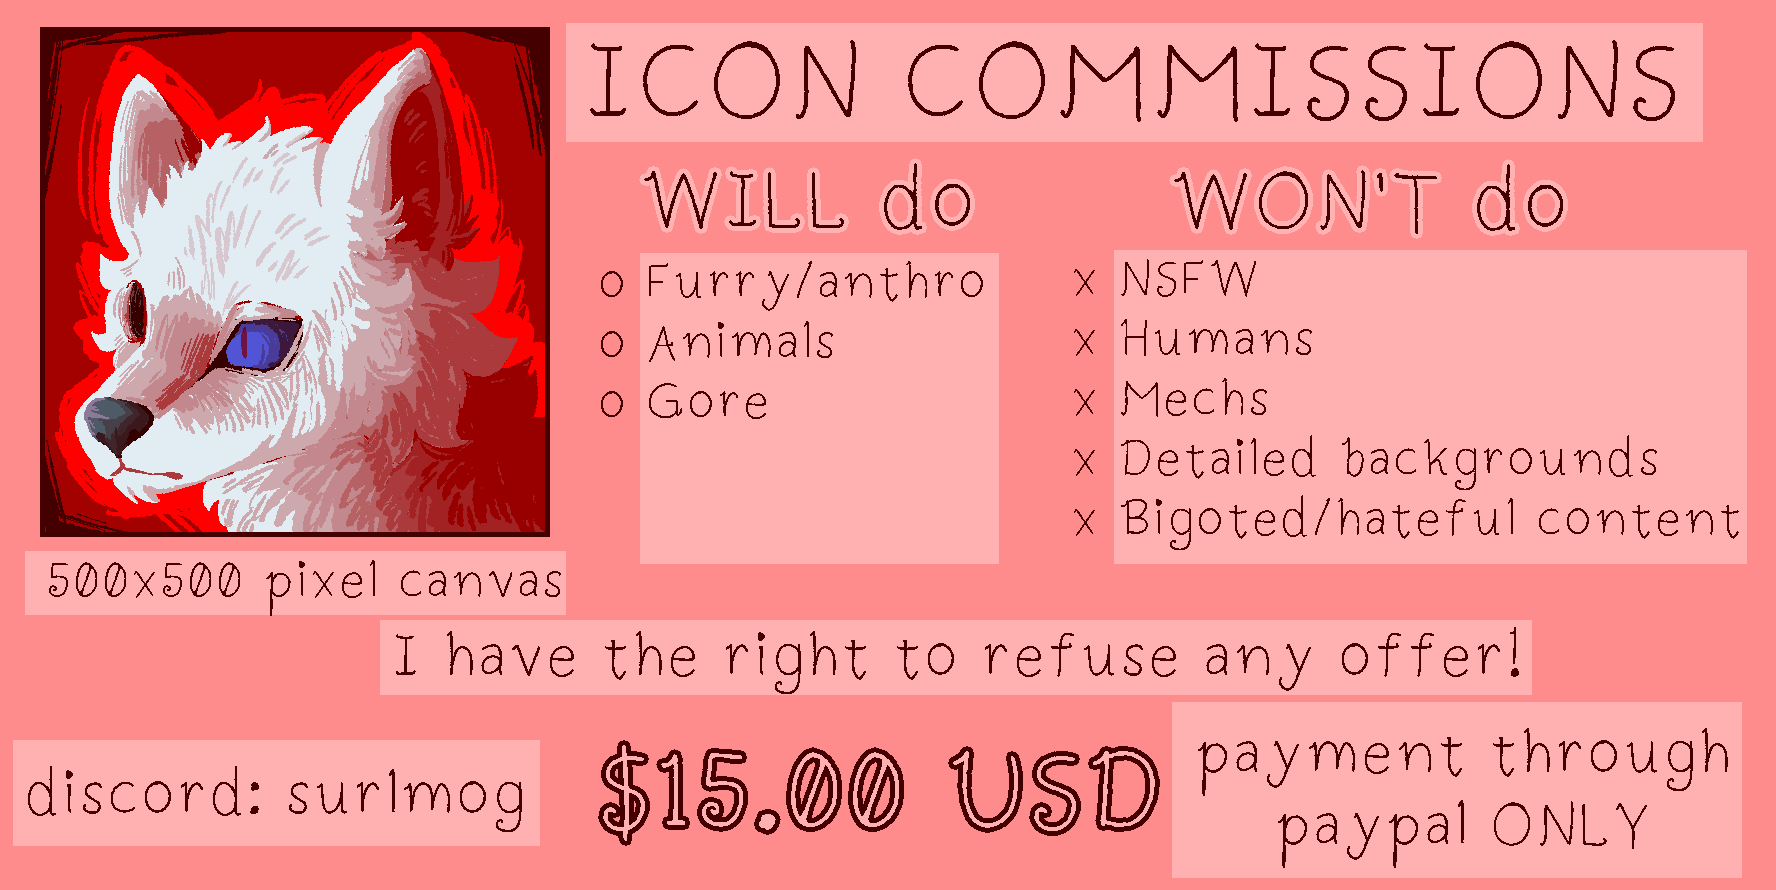 A commission sheet that has icon commissions in all caps at the top. To the left is a icon drawing of a white wolf with the text 500x500 pixel canvas underneath. Under will do furry/anthro, animals, and gore is listed. Under wont do NSFW, humans, mech, detailed backgrounds, and bigoted/hateful content is listed. Underneath the lists text says I have the right to refuse any offer. At the bottom right it says discord: surlmog and at the bottom left it says only payment through paypal ONLY. In the bottom middle it says the price, $15.00 United States dollars.